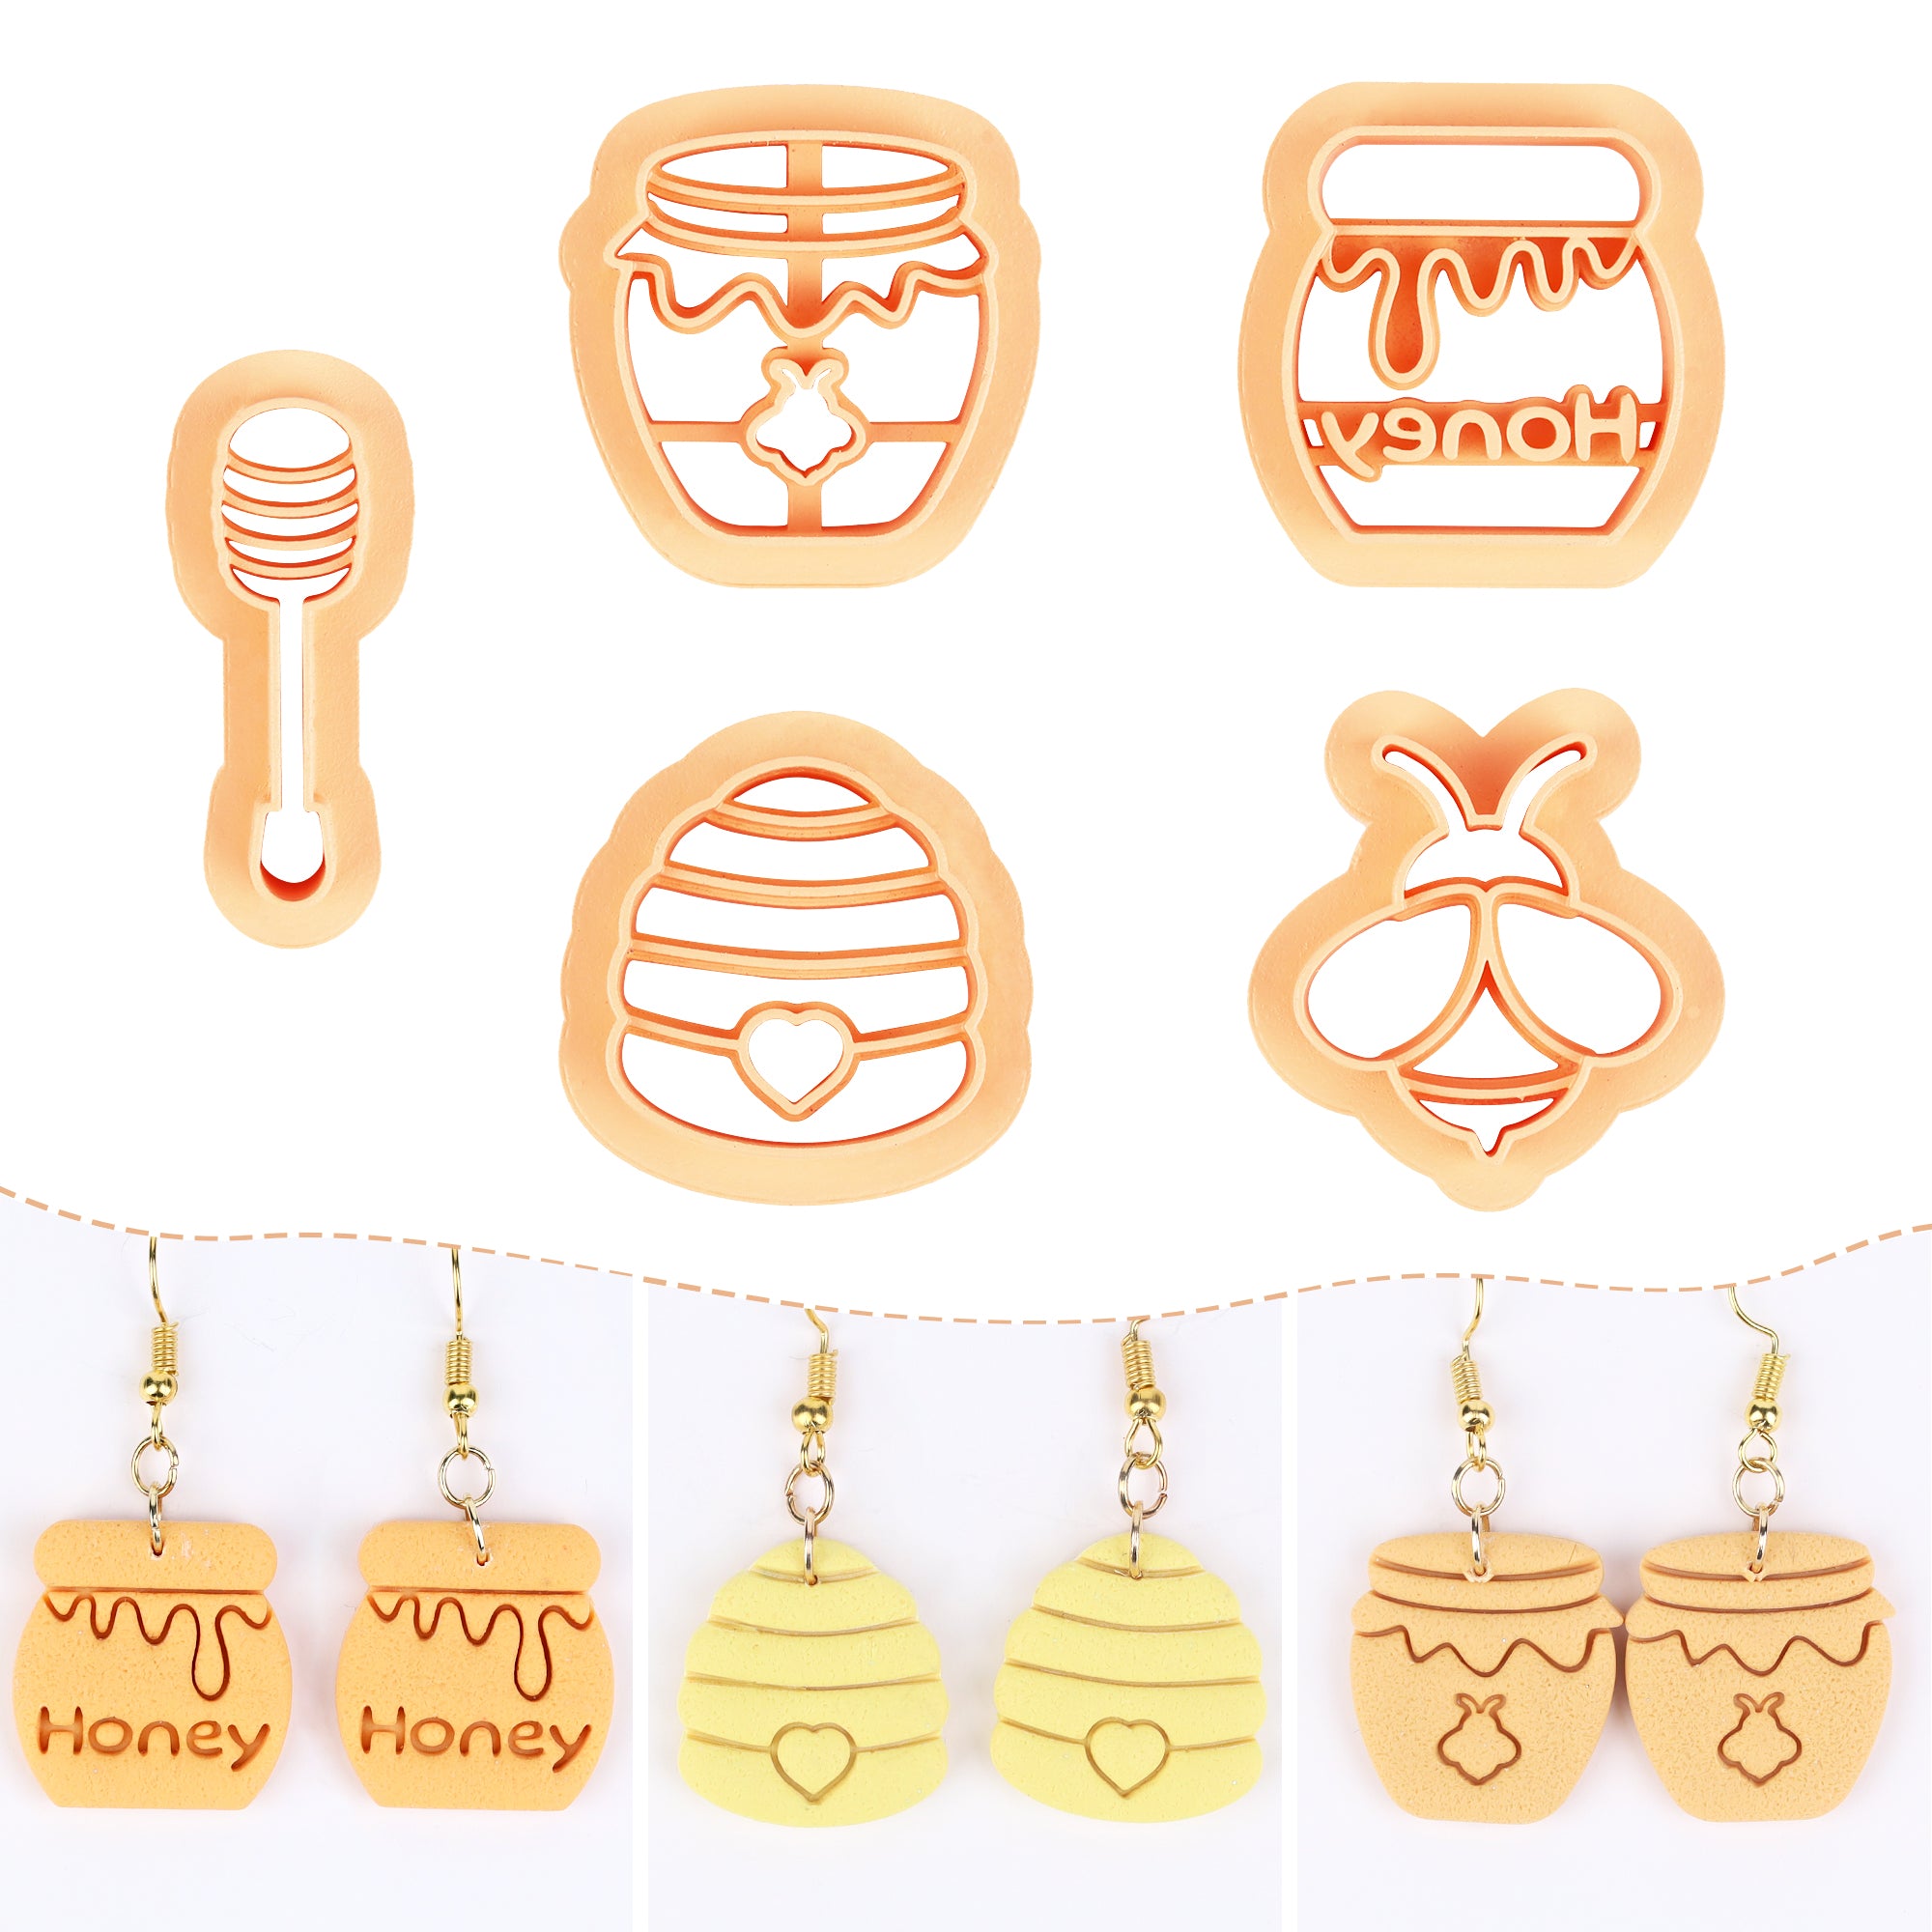 Puocaon Honey Bee Clay Cutters - 5 Pcs